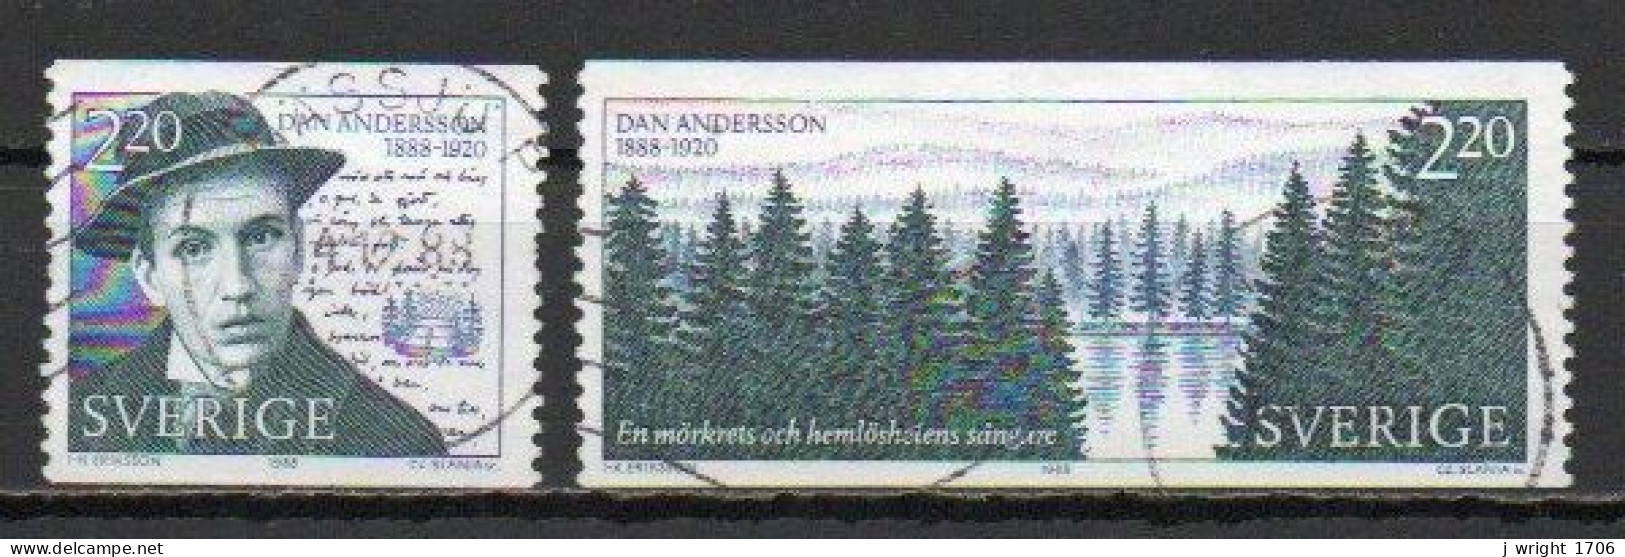 Sweden, 1988, Dan Andersson, Set, USED - Used Stamps